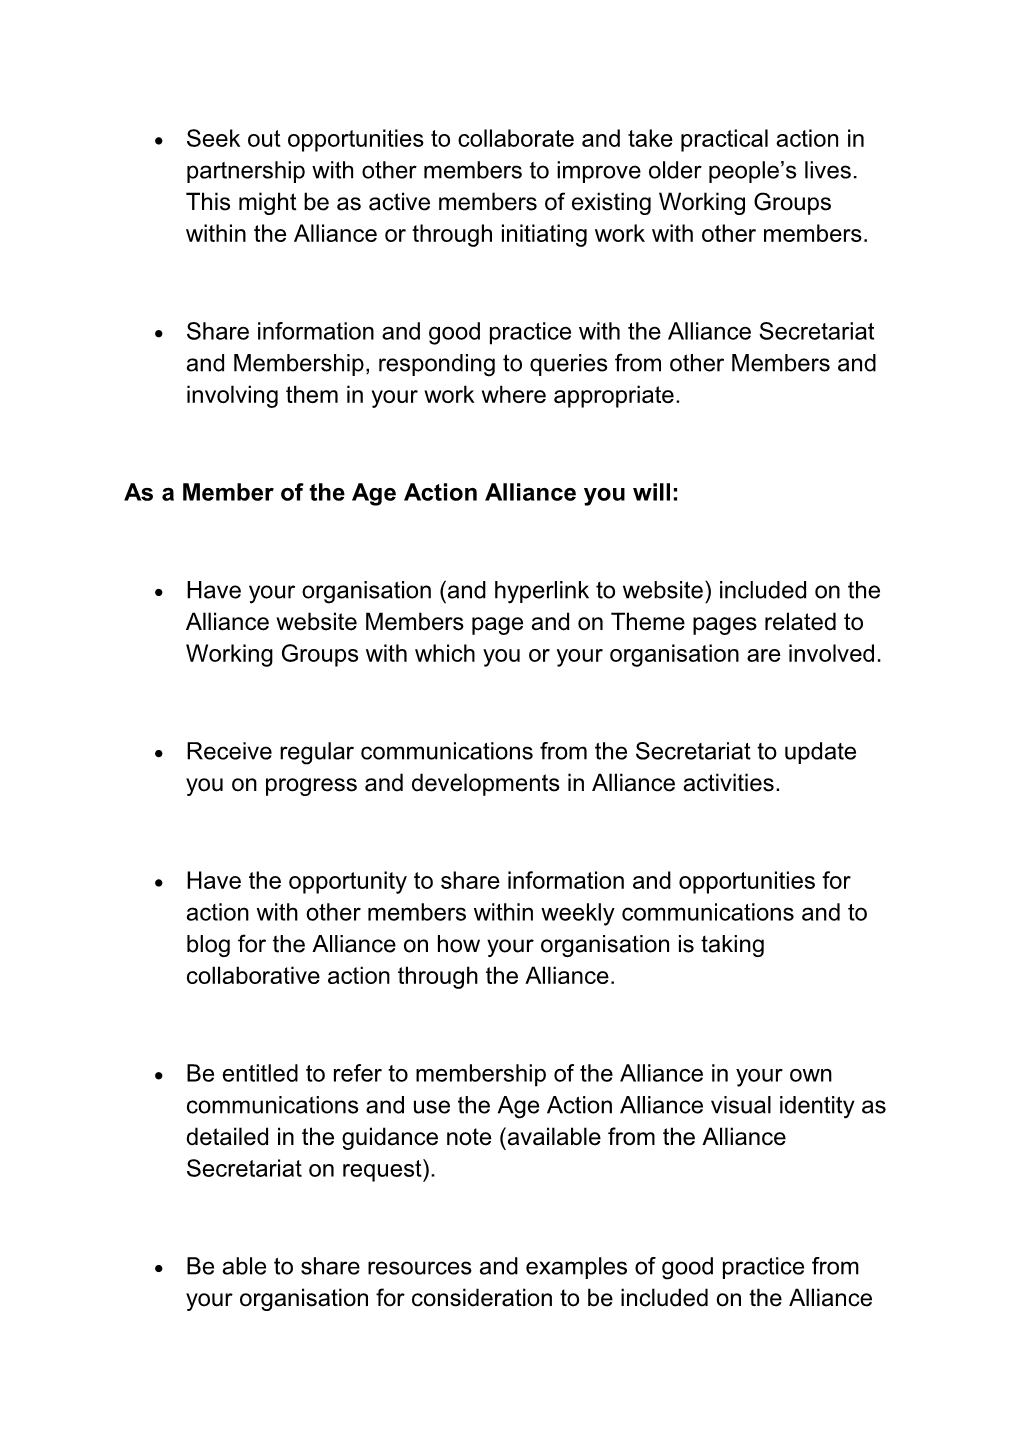 As a Member of the Age Action Allianceyou Agree To